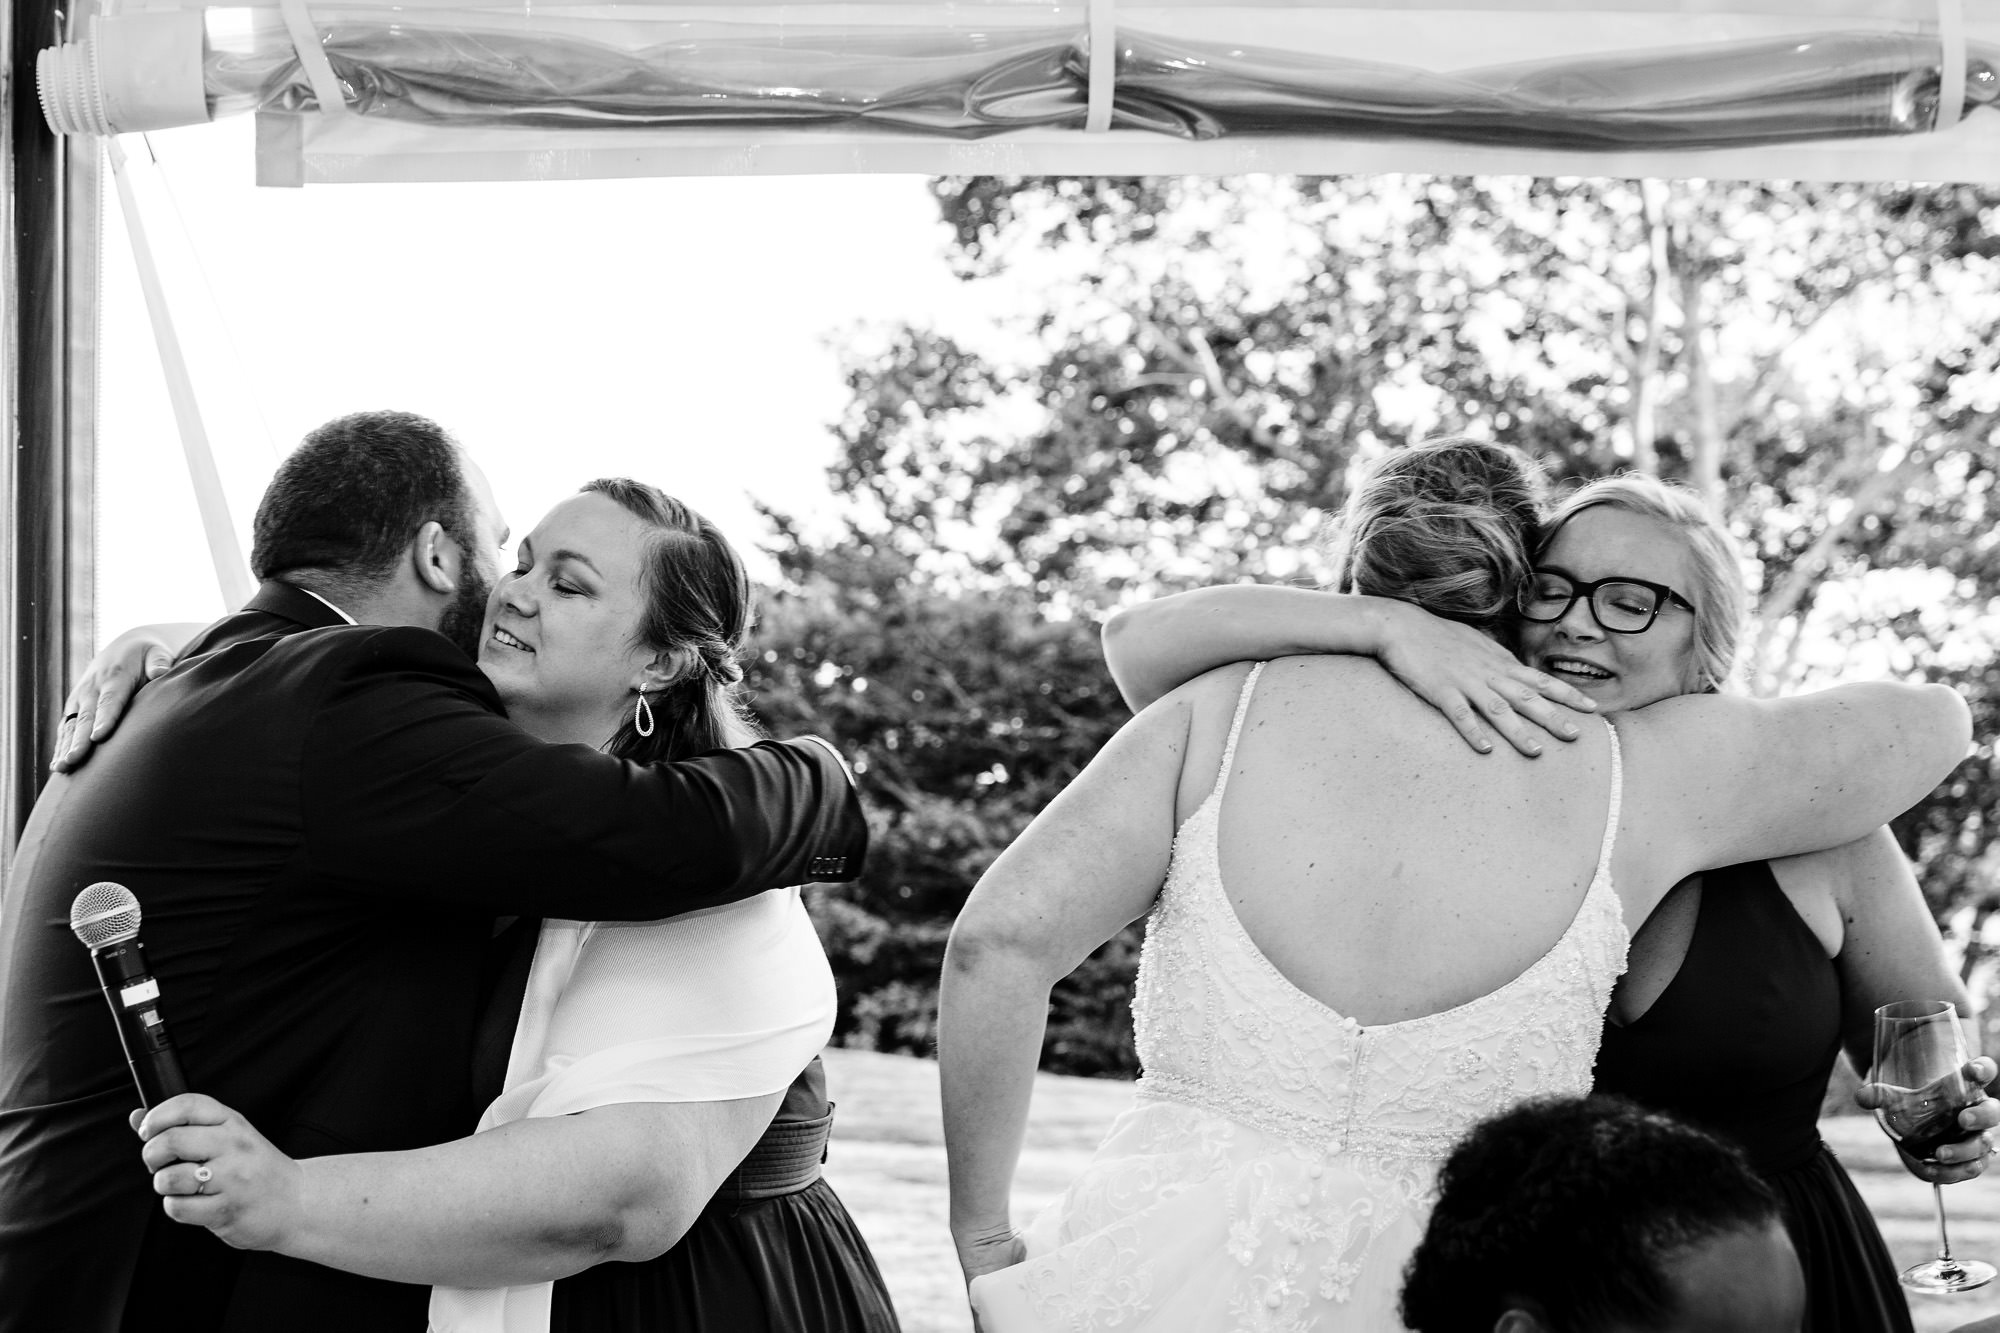 The bride and groom hug two bridesmaids after an emotional toast at their Maine wedding